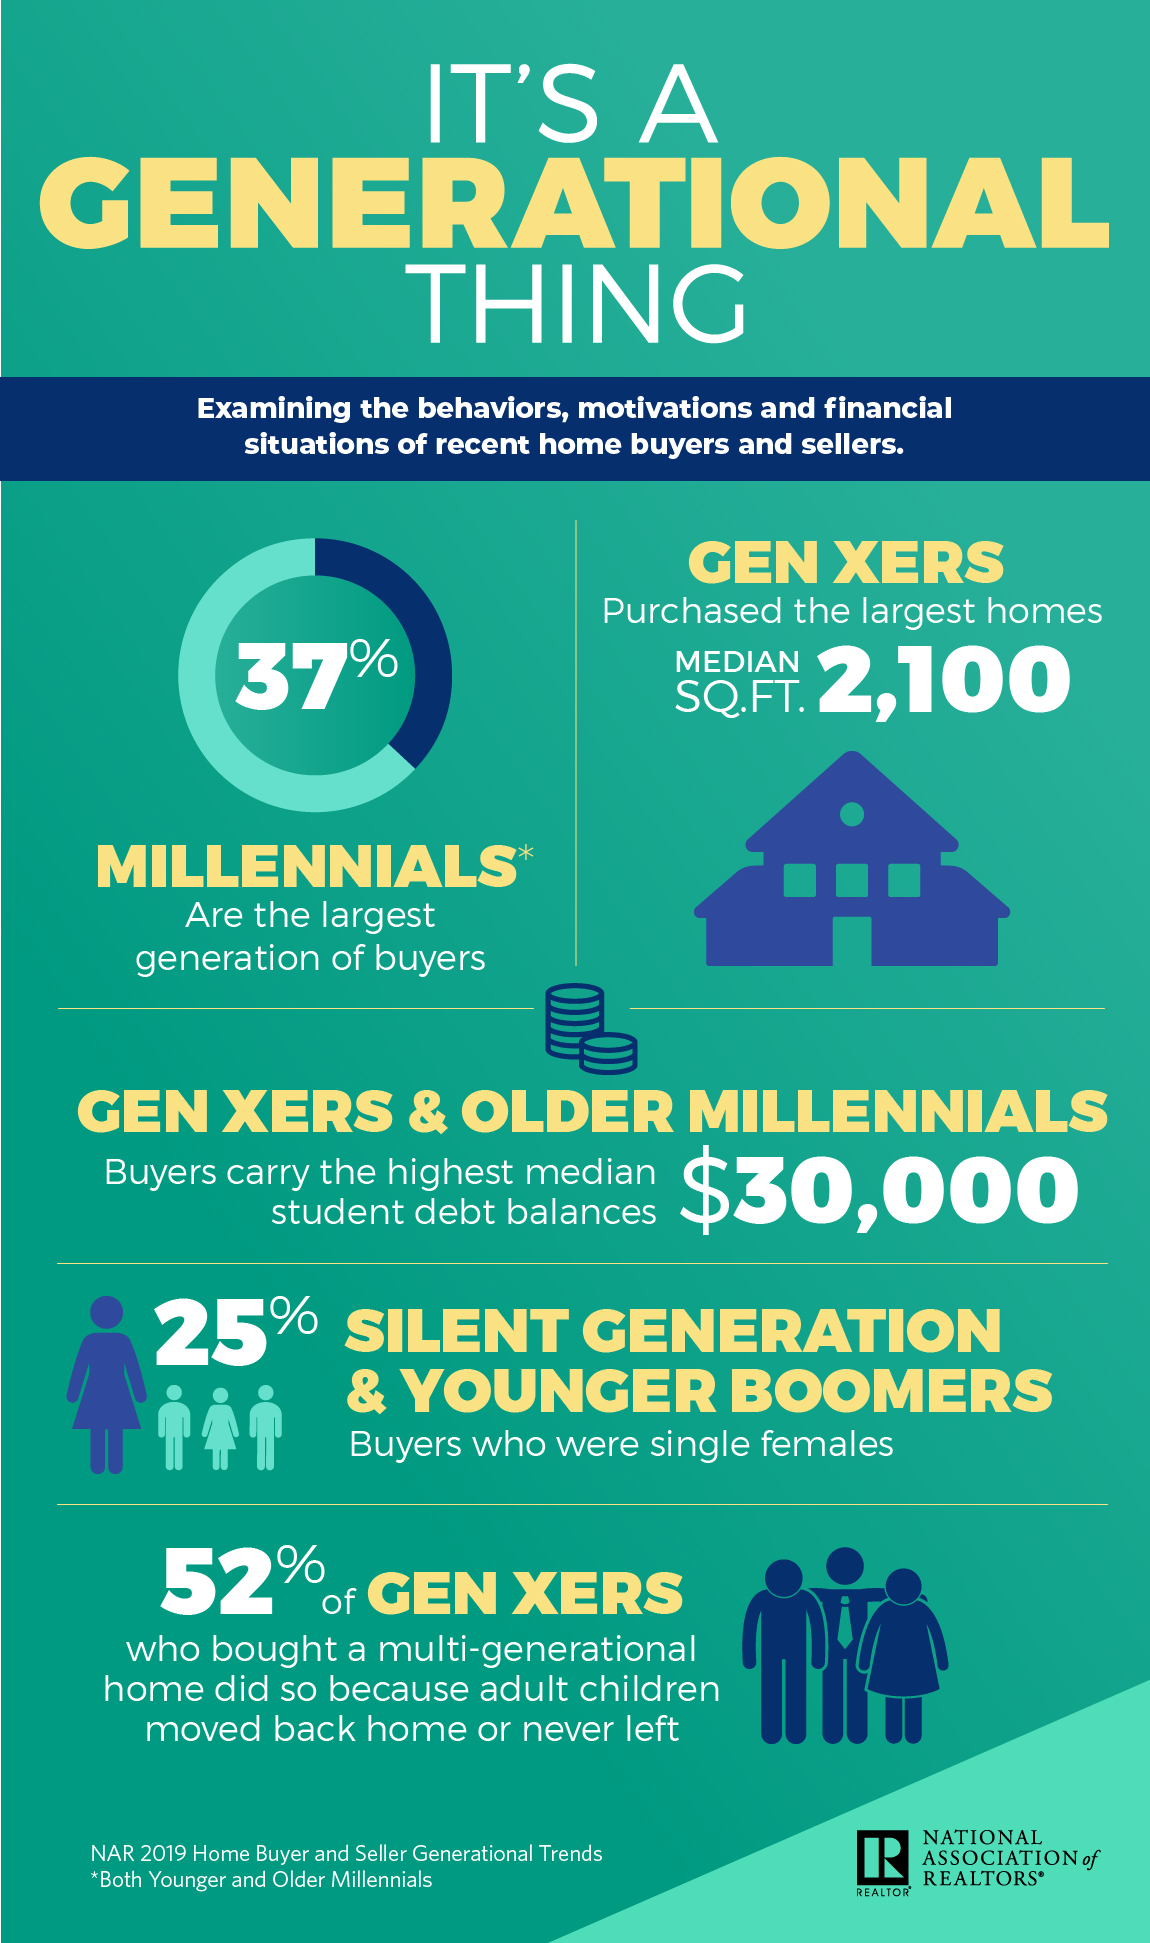 Gå rundt Mob Oversigt Gen Xers' Adult Children Influence Their Buying Decisions, Younger  Millennials Become Buying Force According to Realtor® Report